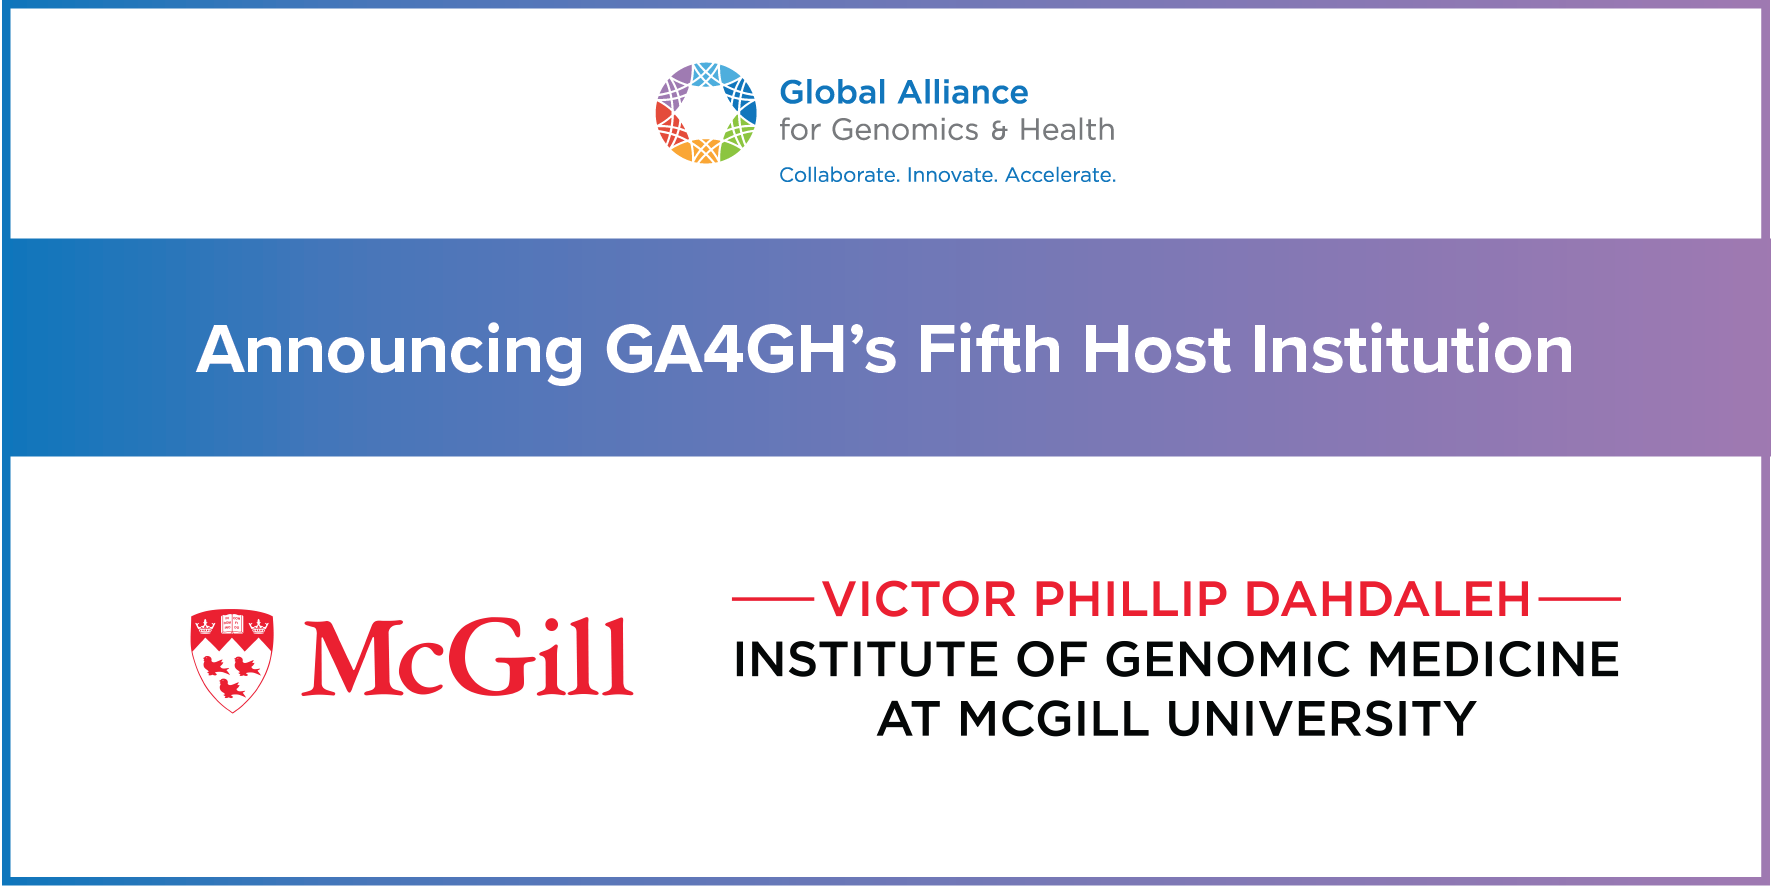 GA4GH logo and McGill's Victor Phillip Dahdaleh Institute of Genomic Medicine logo, with a sentence saying "Announcing GA4GH's Fifth Host Institution"